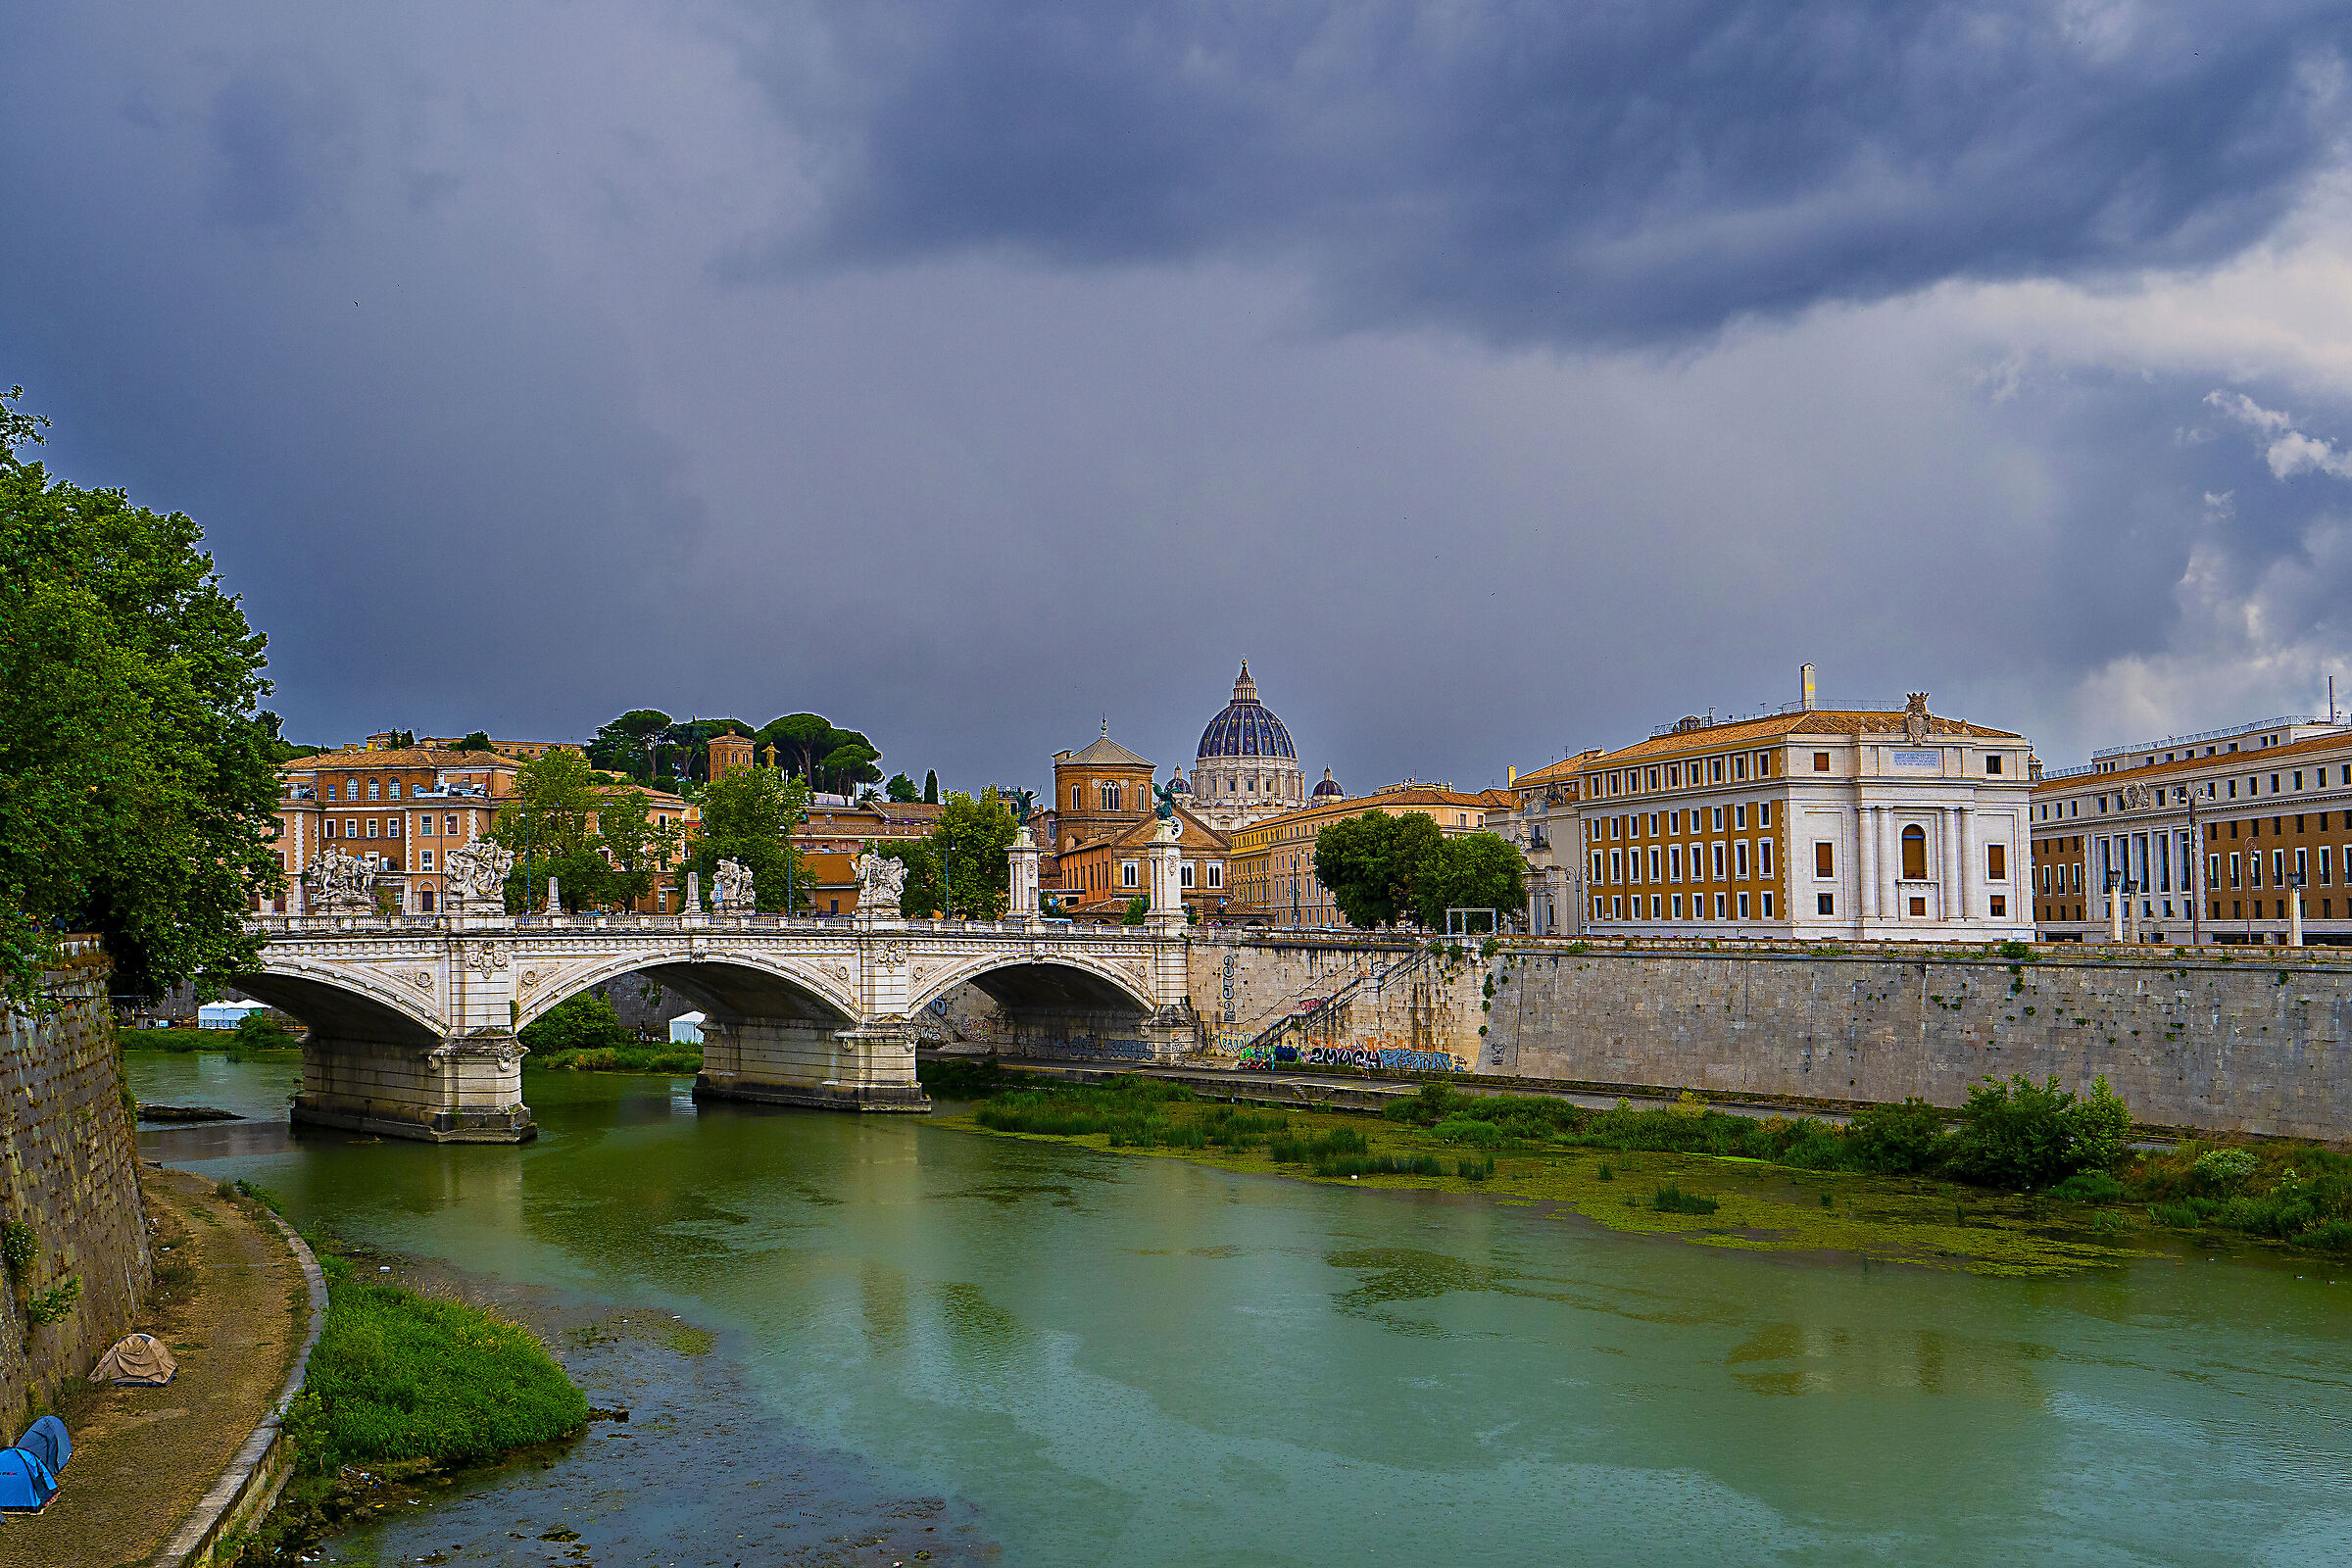 Thunderstorm coming on the Tiber...